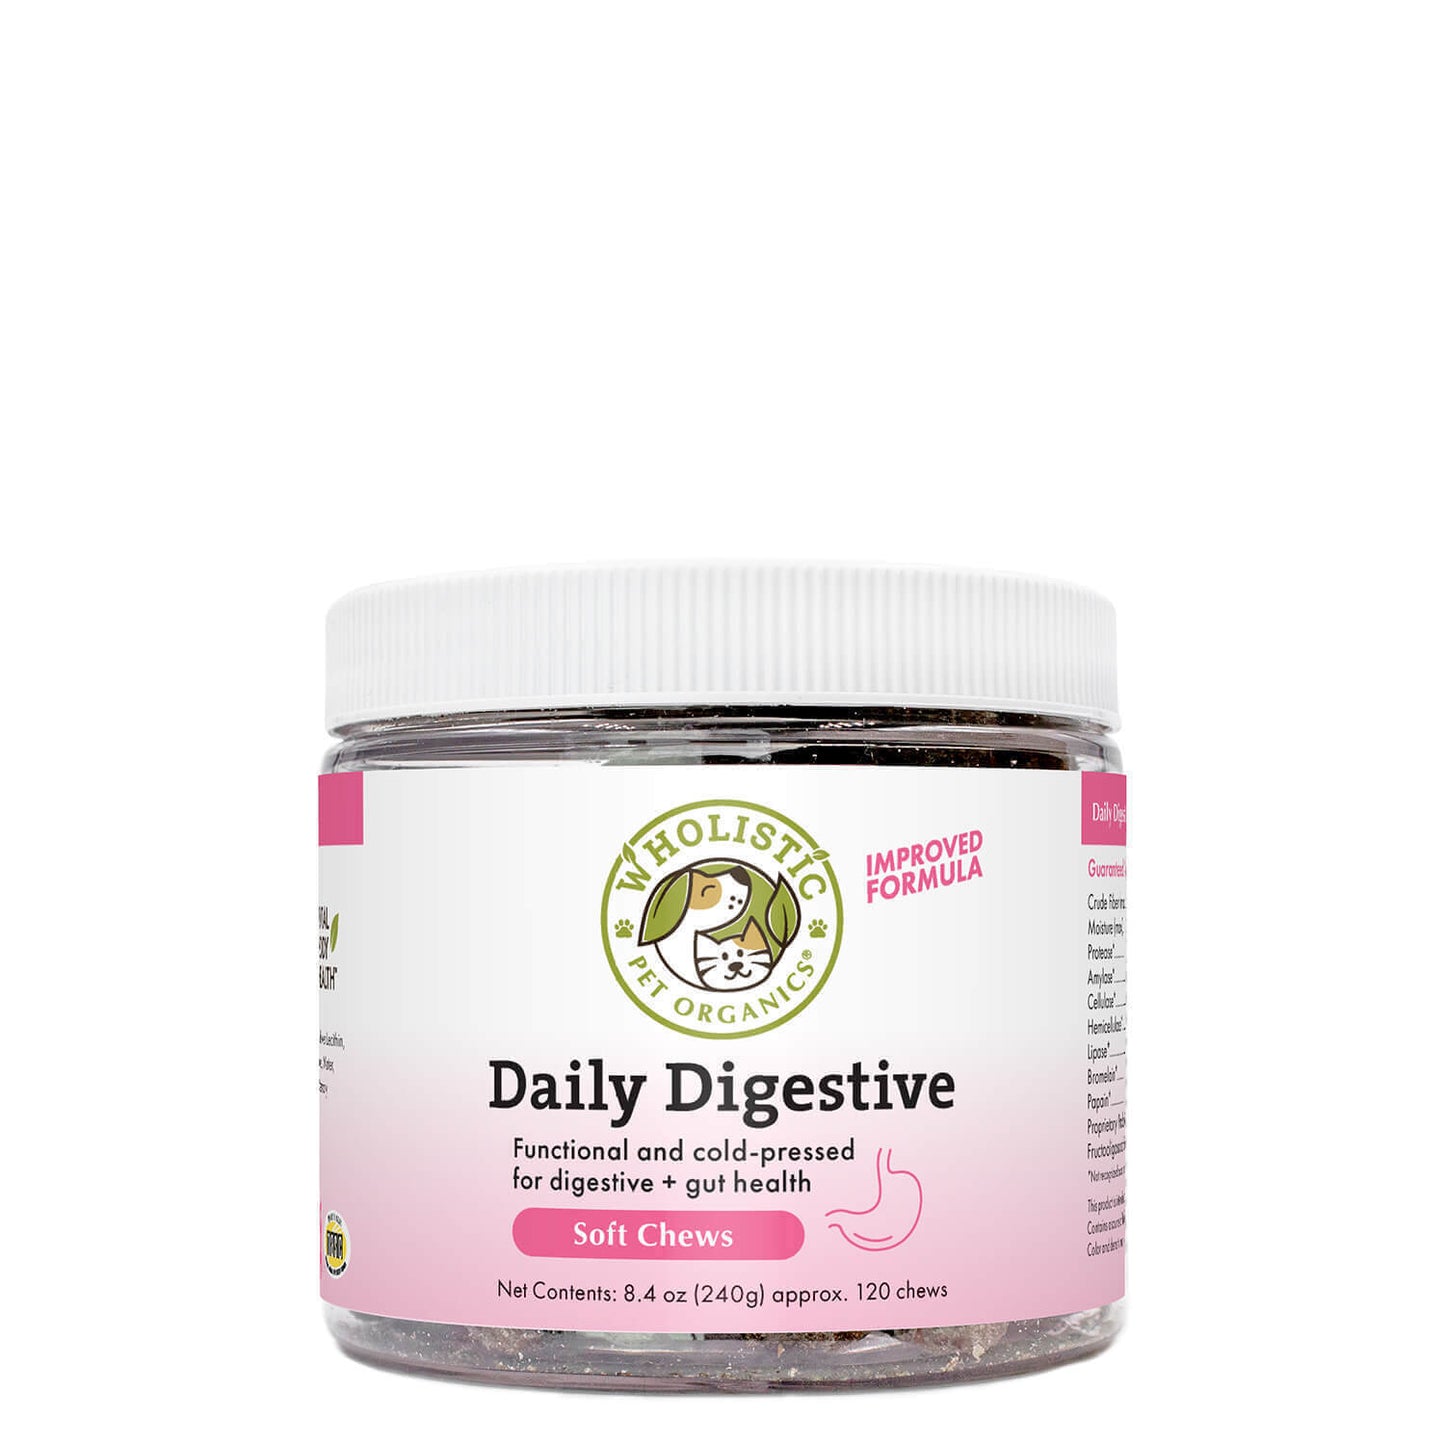 Daily Digestive Soft Chews for dogs and cats